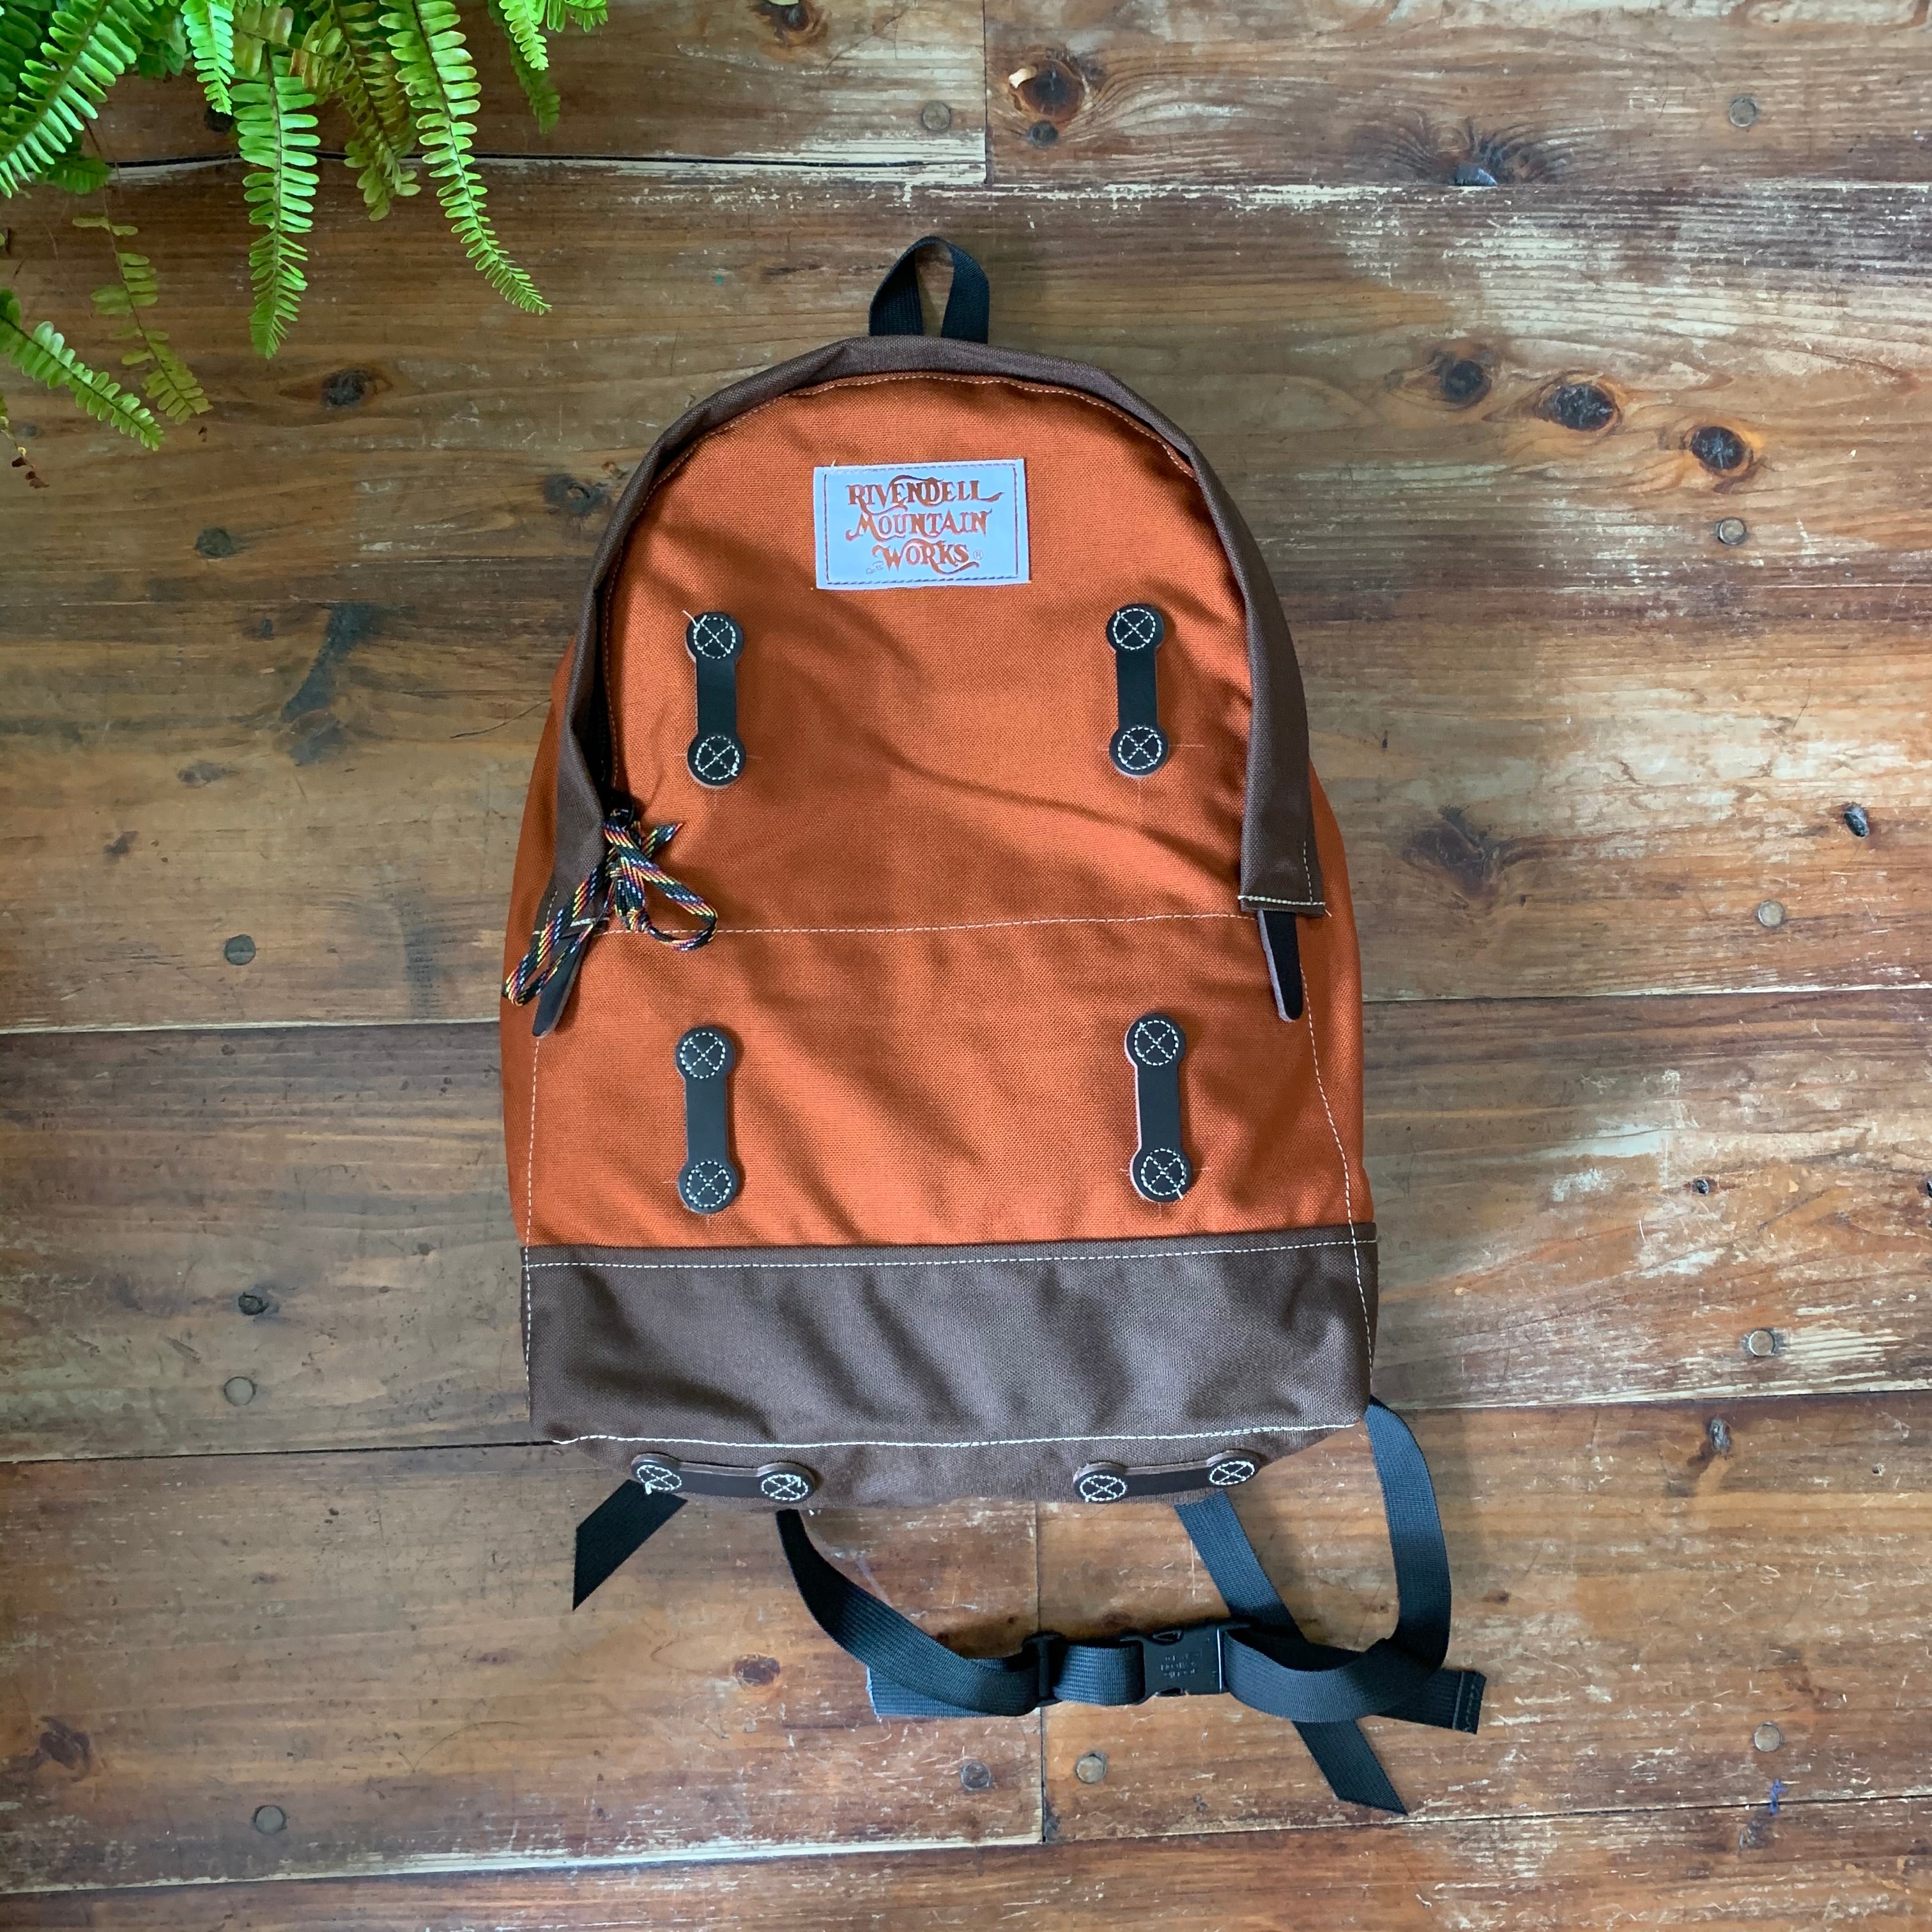 Rivendell Mountain Works Lupine Daypack - リュック/バックパック